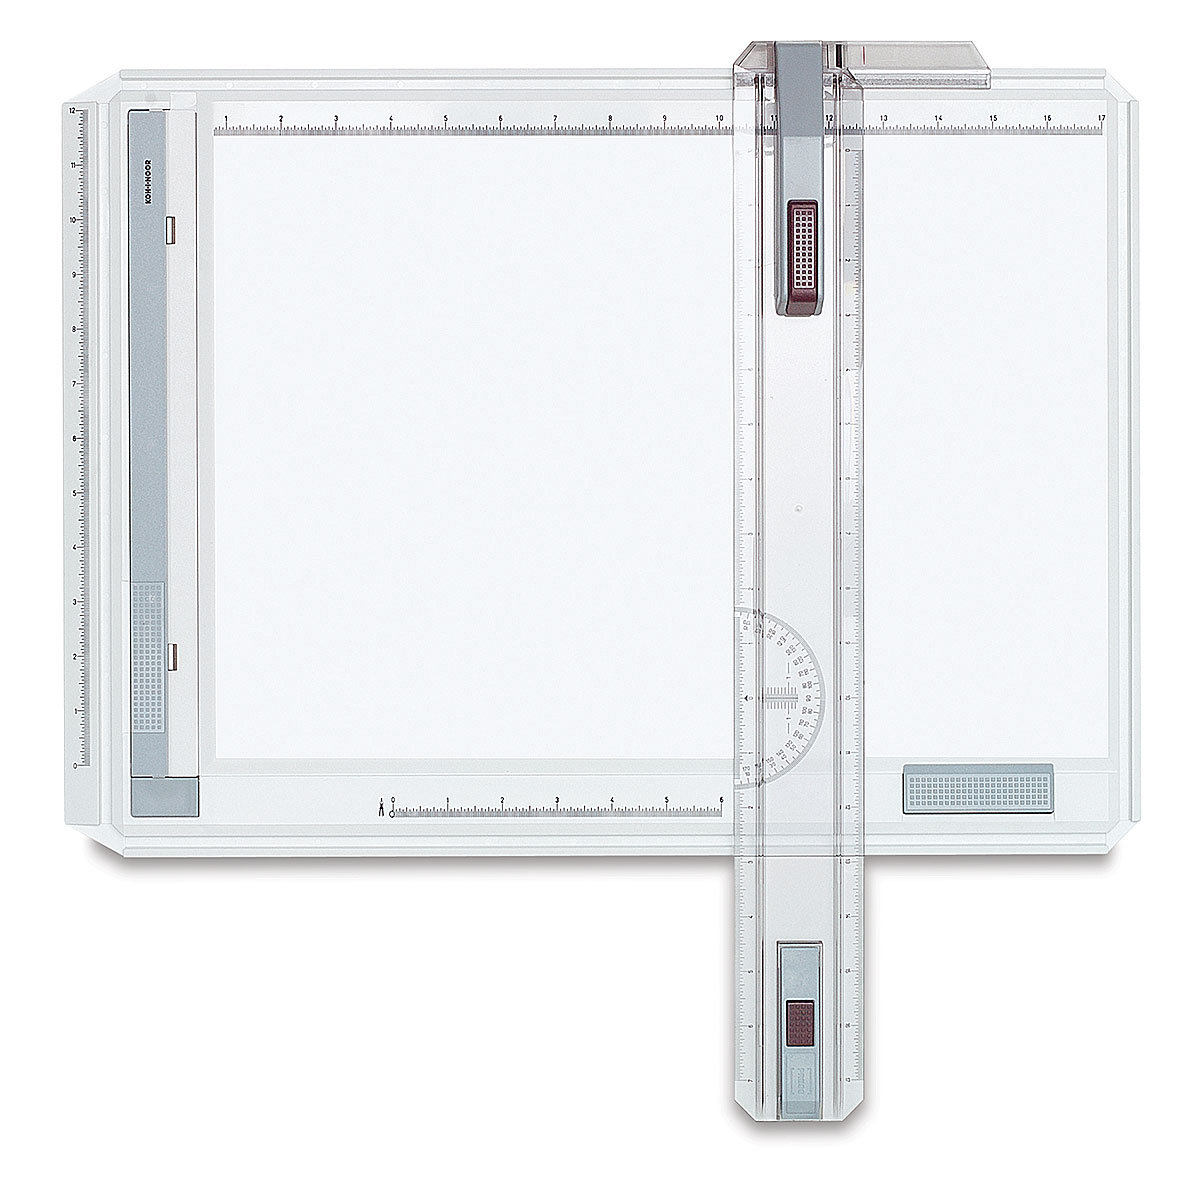 Blick Portable Tabletop Drafting Board with Parallel Ruler Straight Edge -  18 x 24